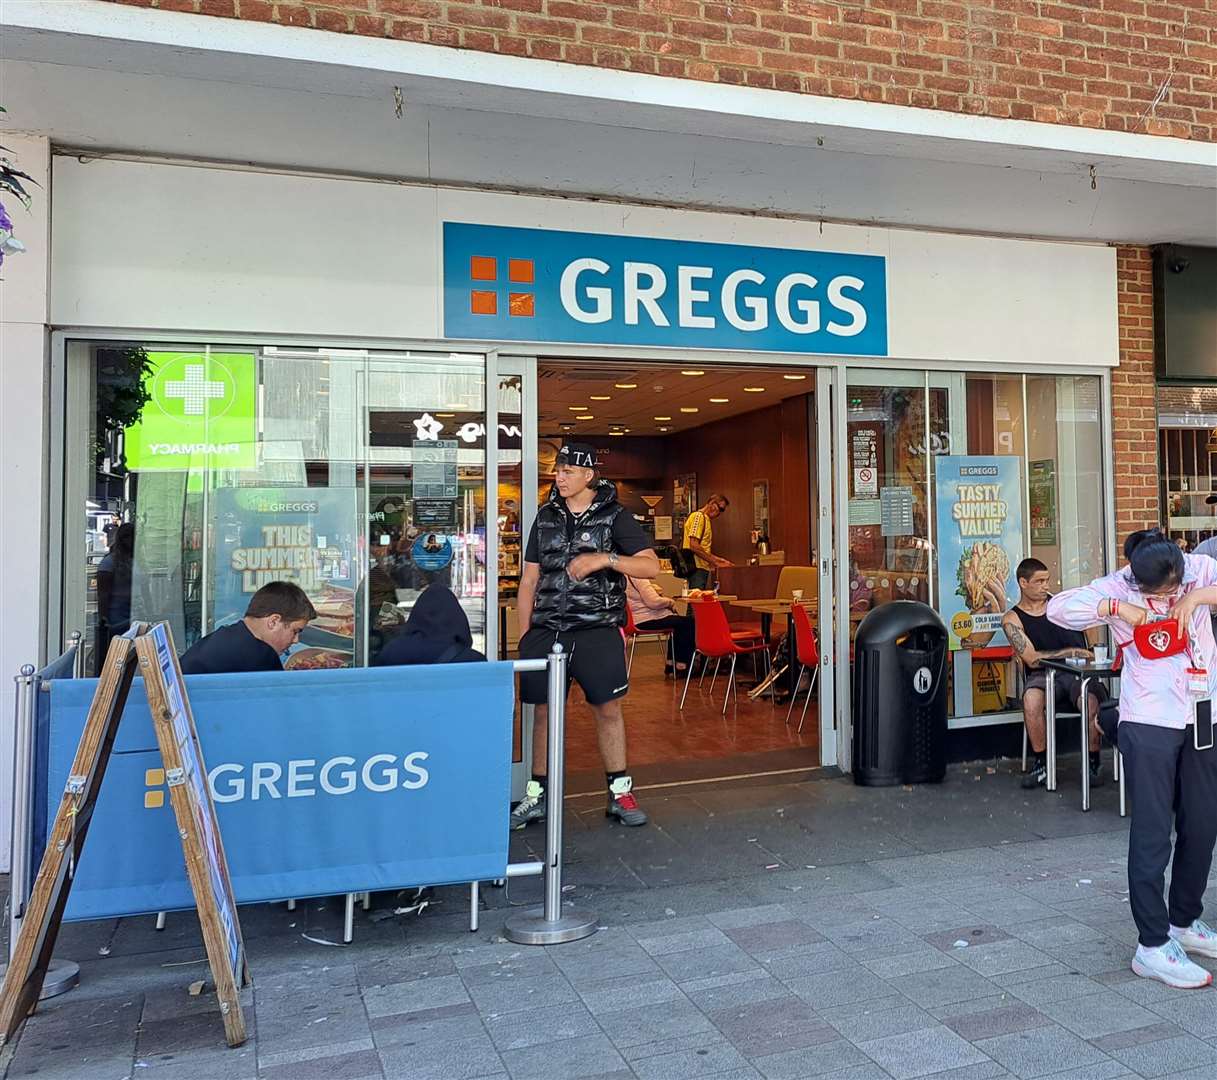 Greggs in George Street, Canterbury could be open 24 hours if its application is approved